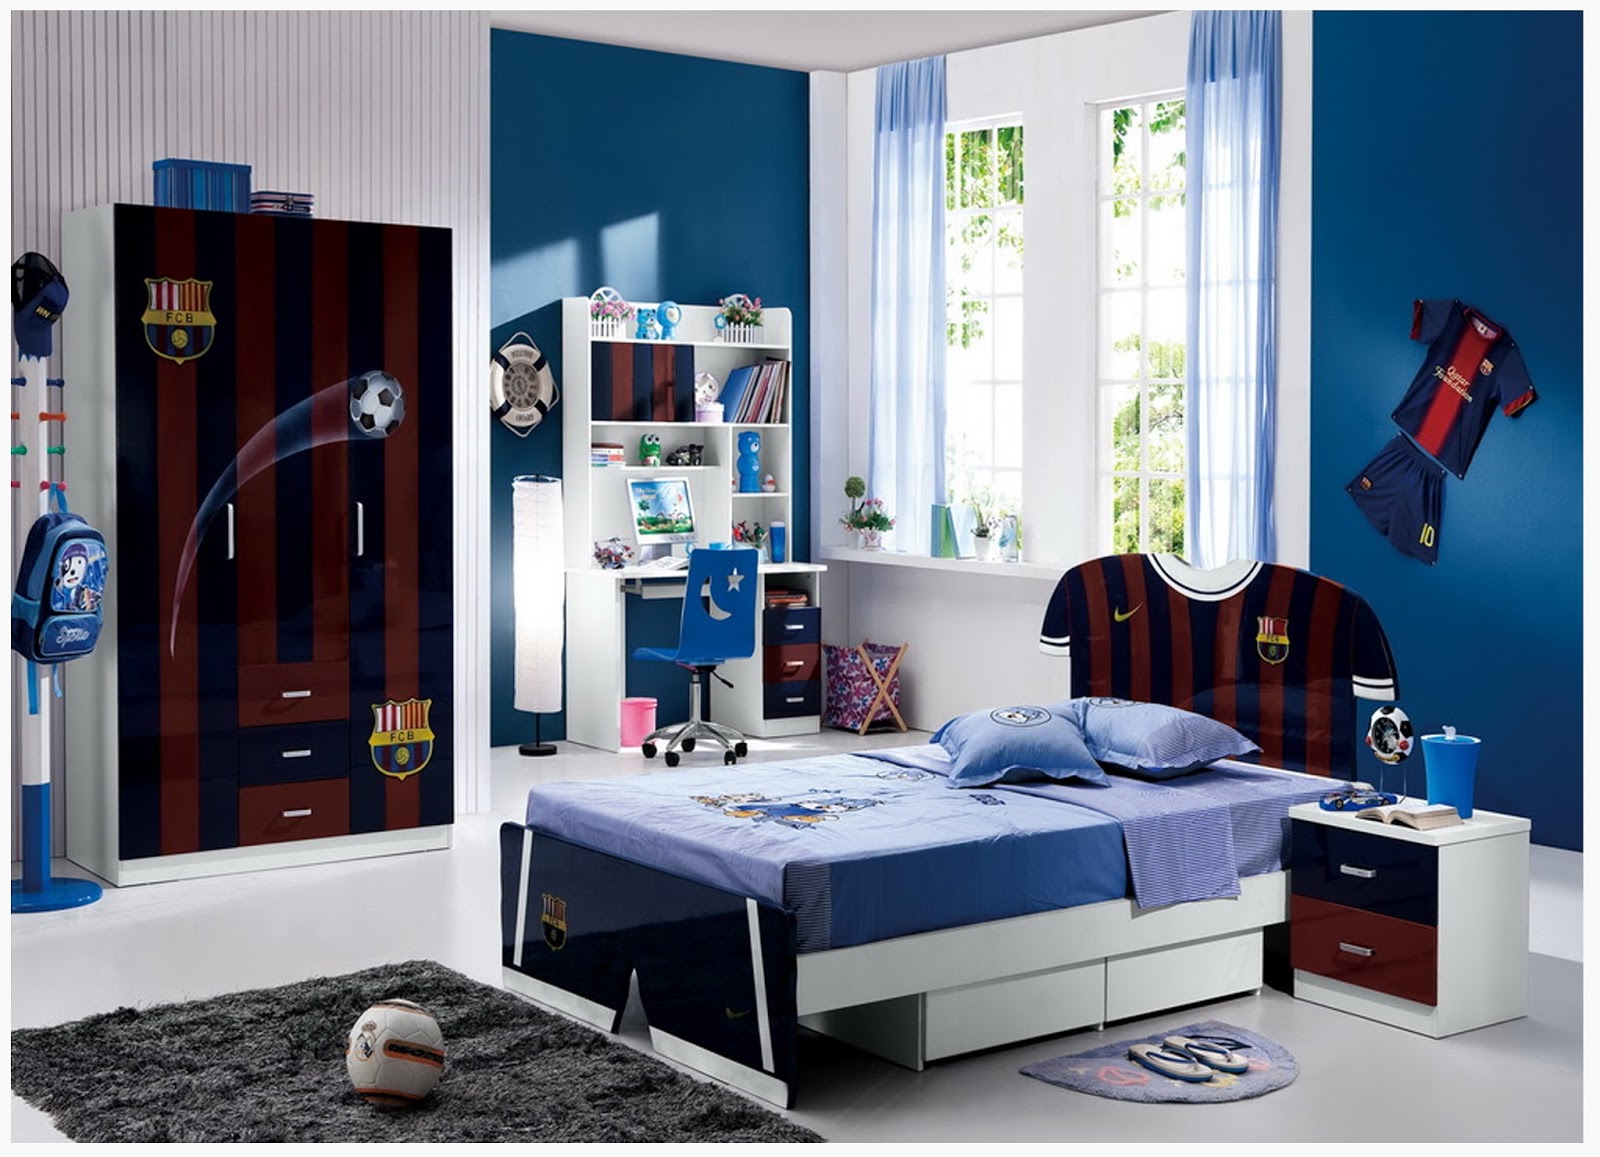 Cool Boys Bedroom Decoration  with FC Barcelona  Theme 